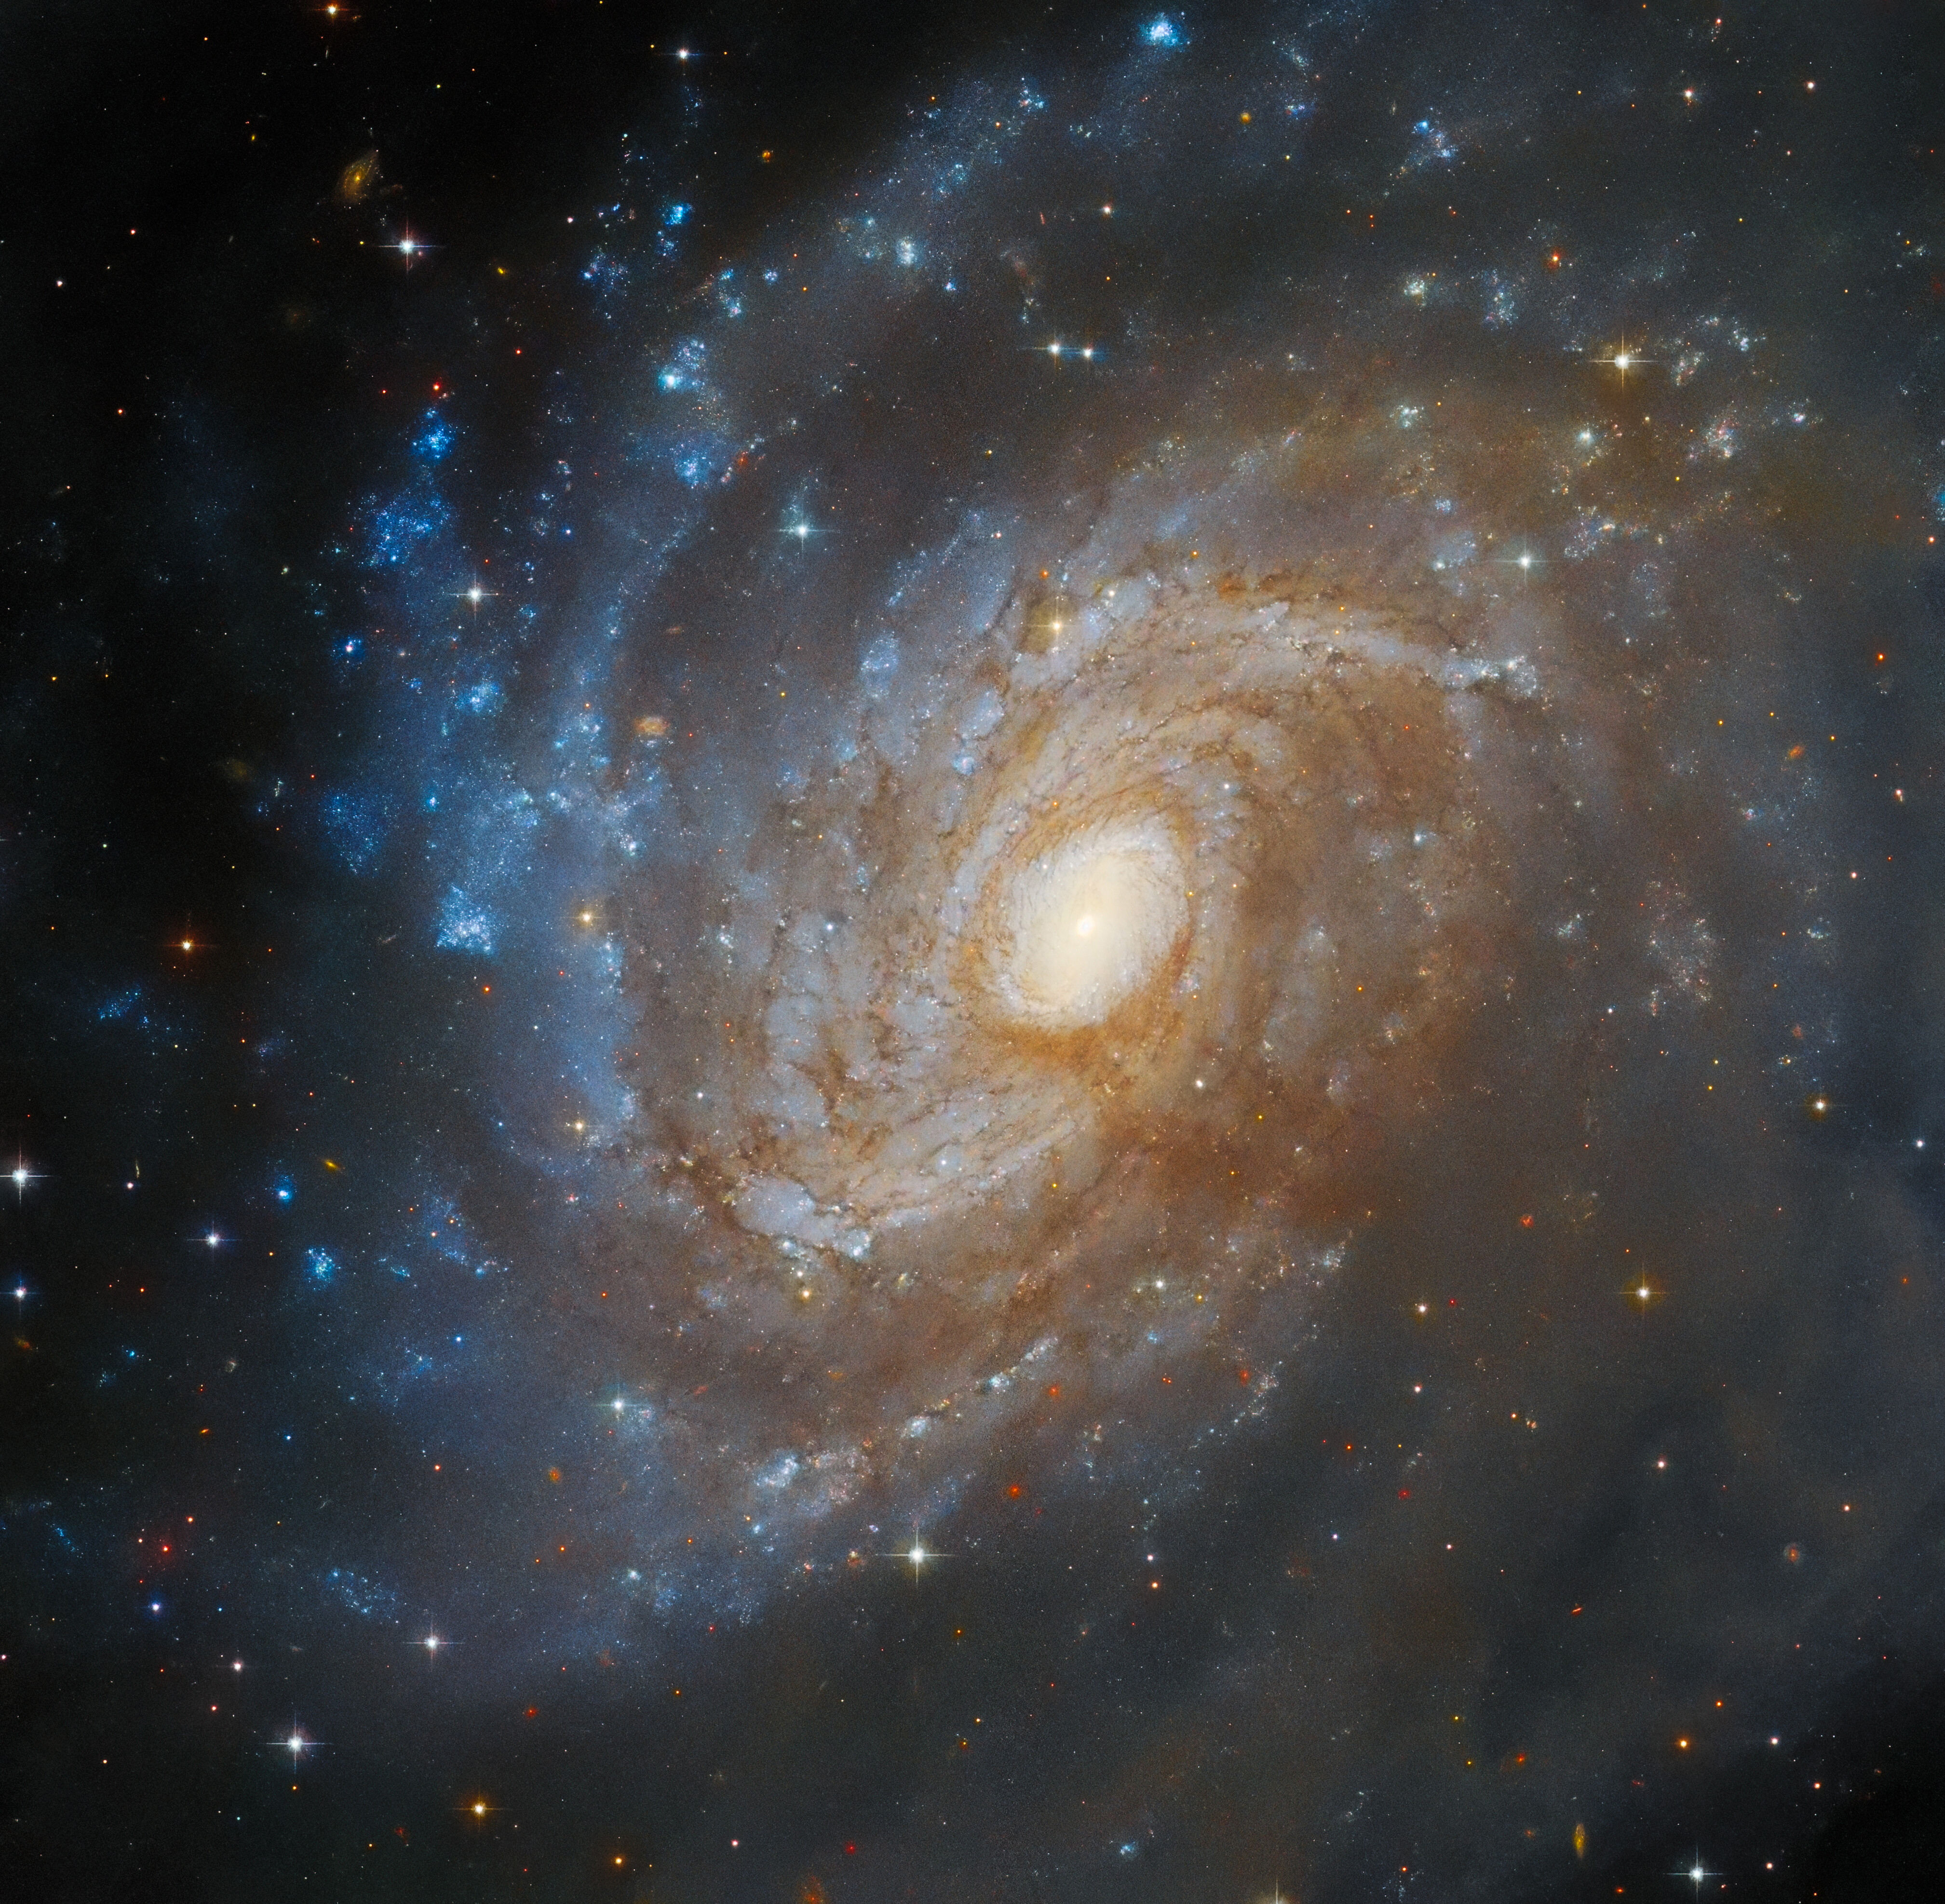 A spiral galaxy seen nearly face-on. The disk holds many tightly wound spiral arms. They contain small strands of reddish dust, near the center. On the left side, the disk features glowing patches of star formation. The whole right side, and part of the center, is obscured by a large cloud of dark grey gas which crosses the image.